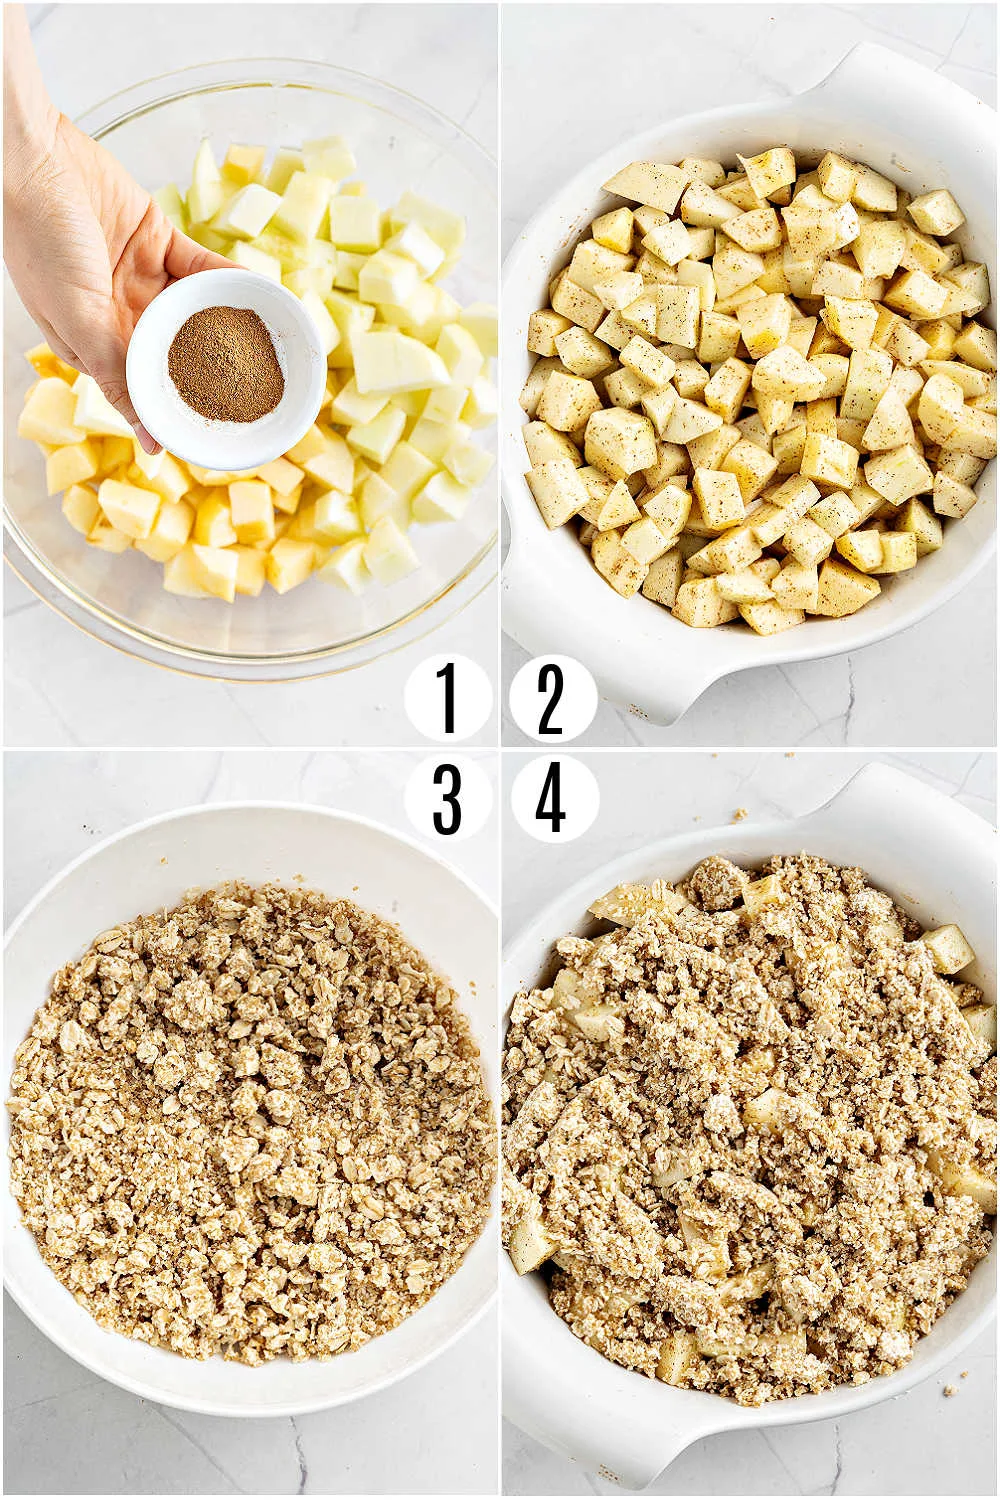 Step by step photos showing how to make apple crisp.